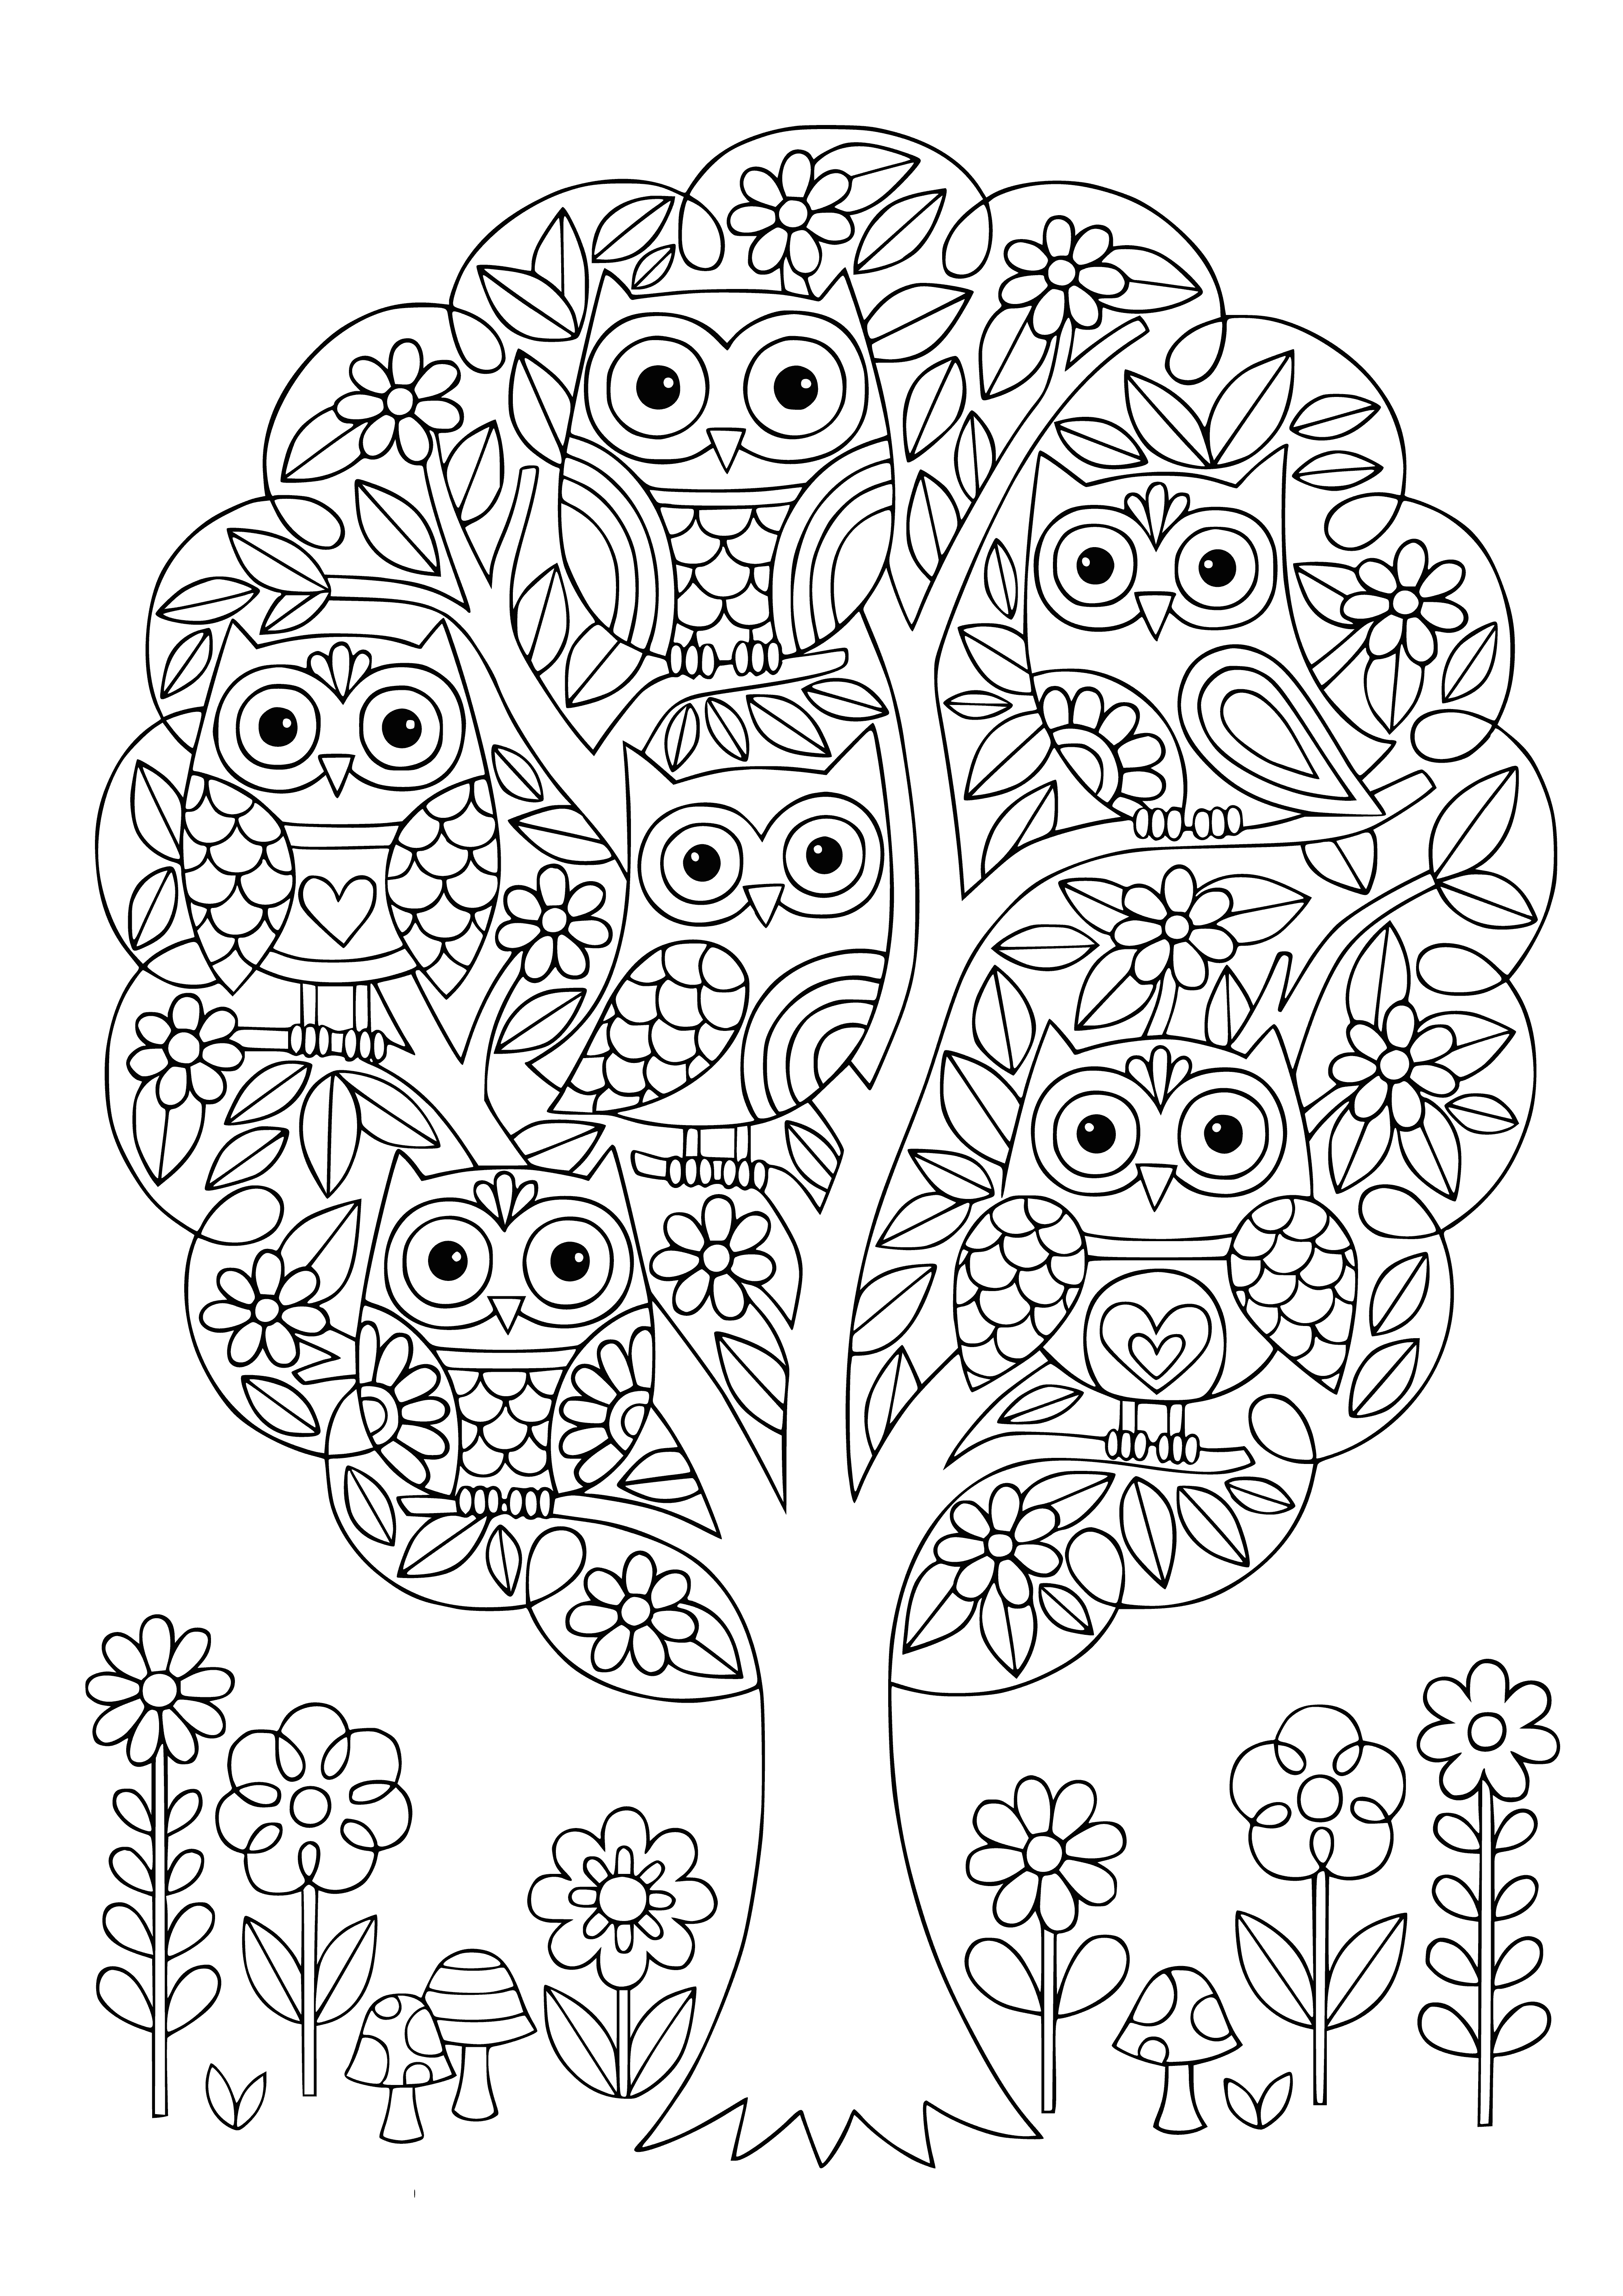 coloring page: Two owls perched on a tree, big eyes & long beaks, stripes on their wings, looking at each other.